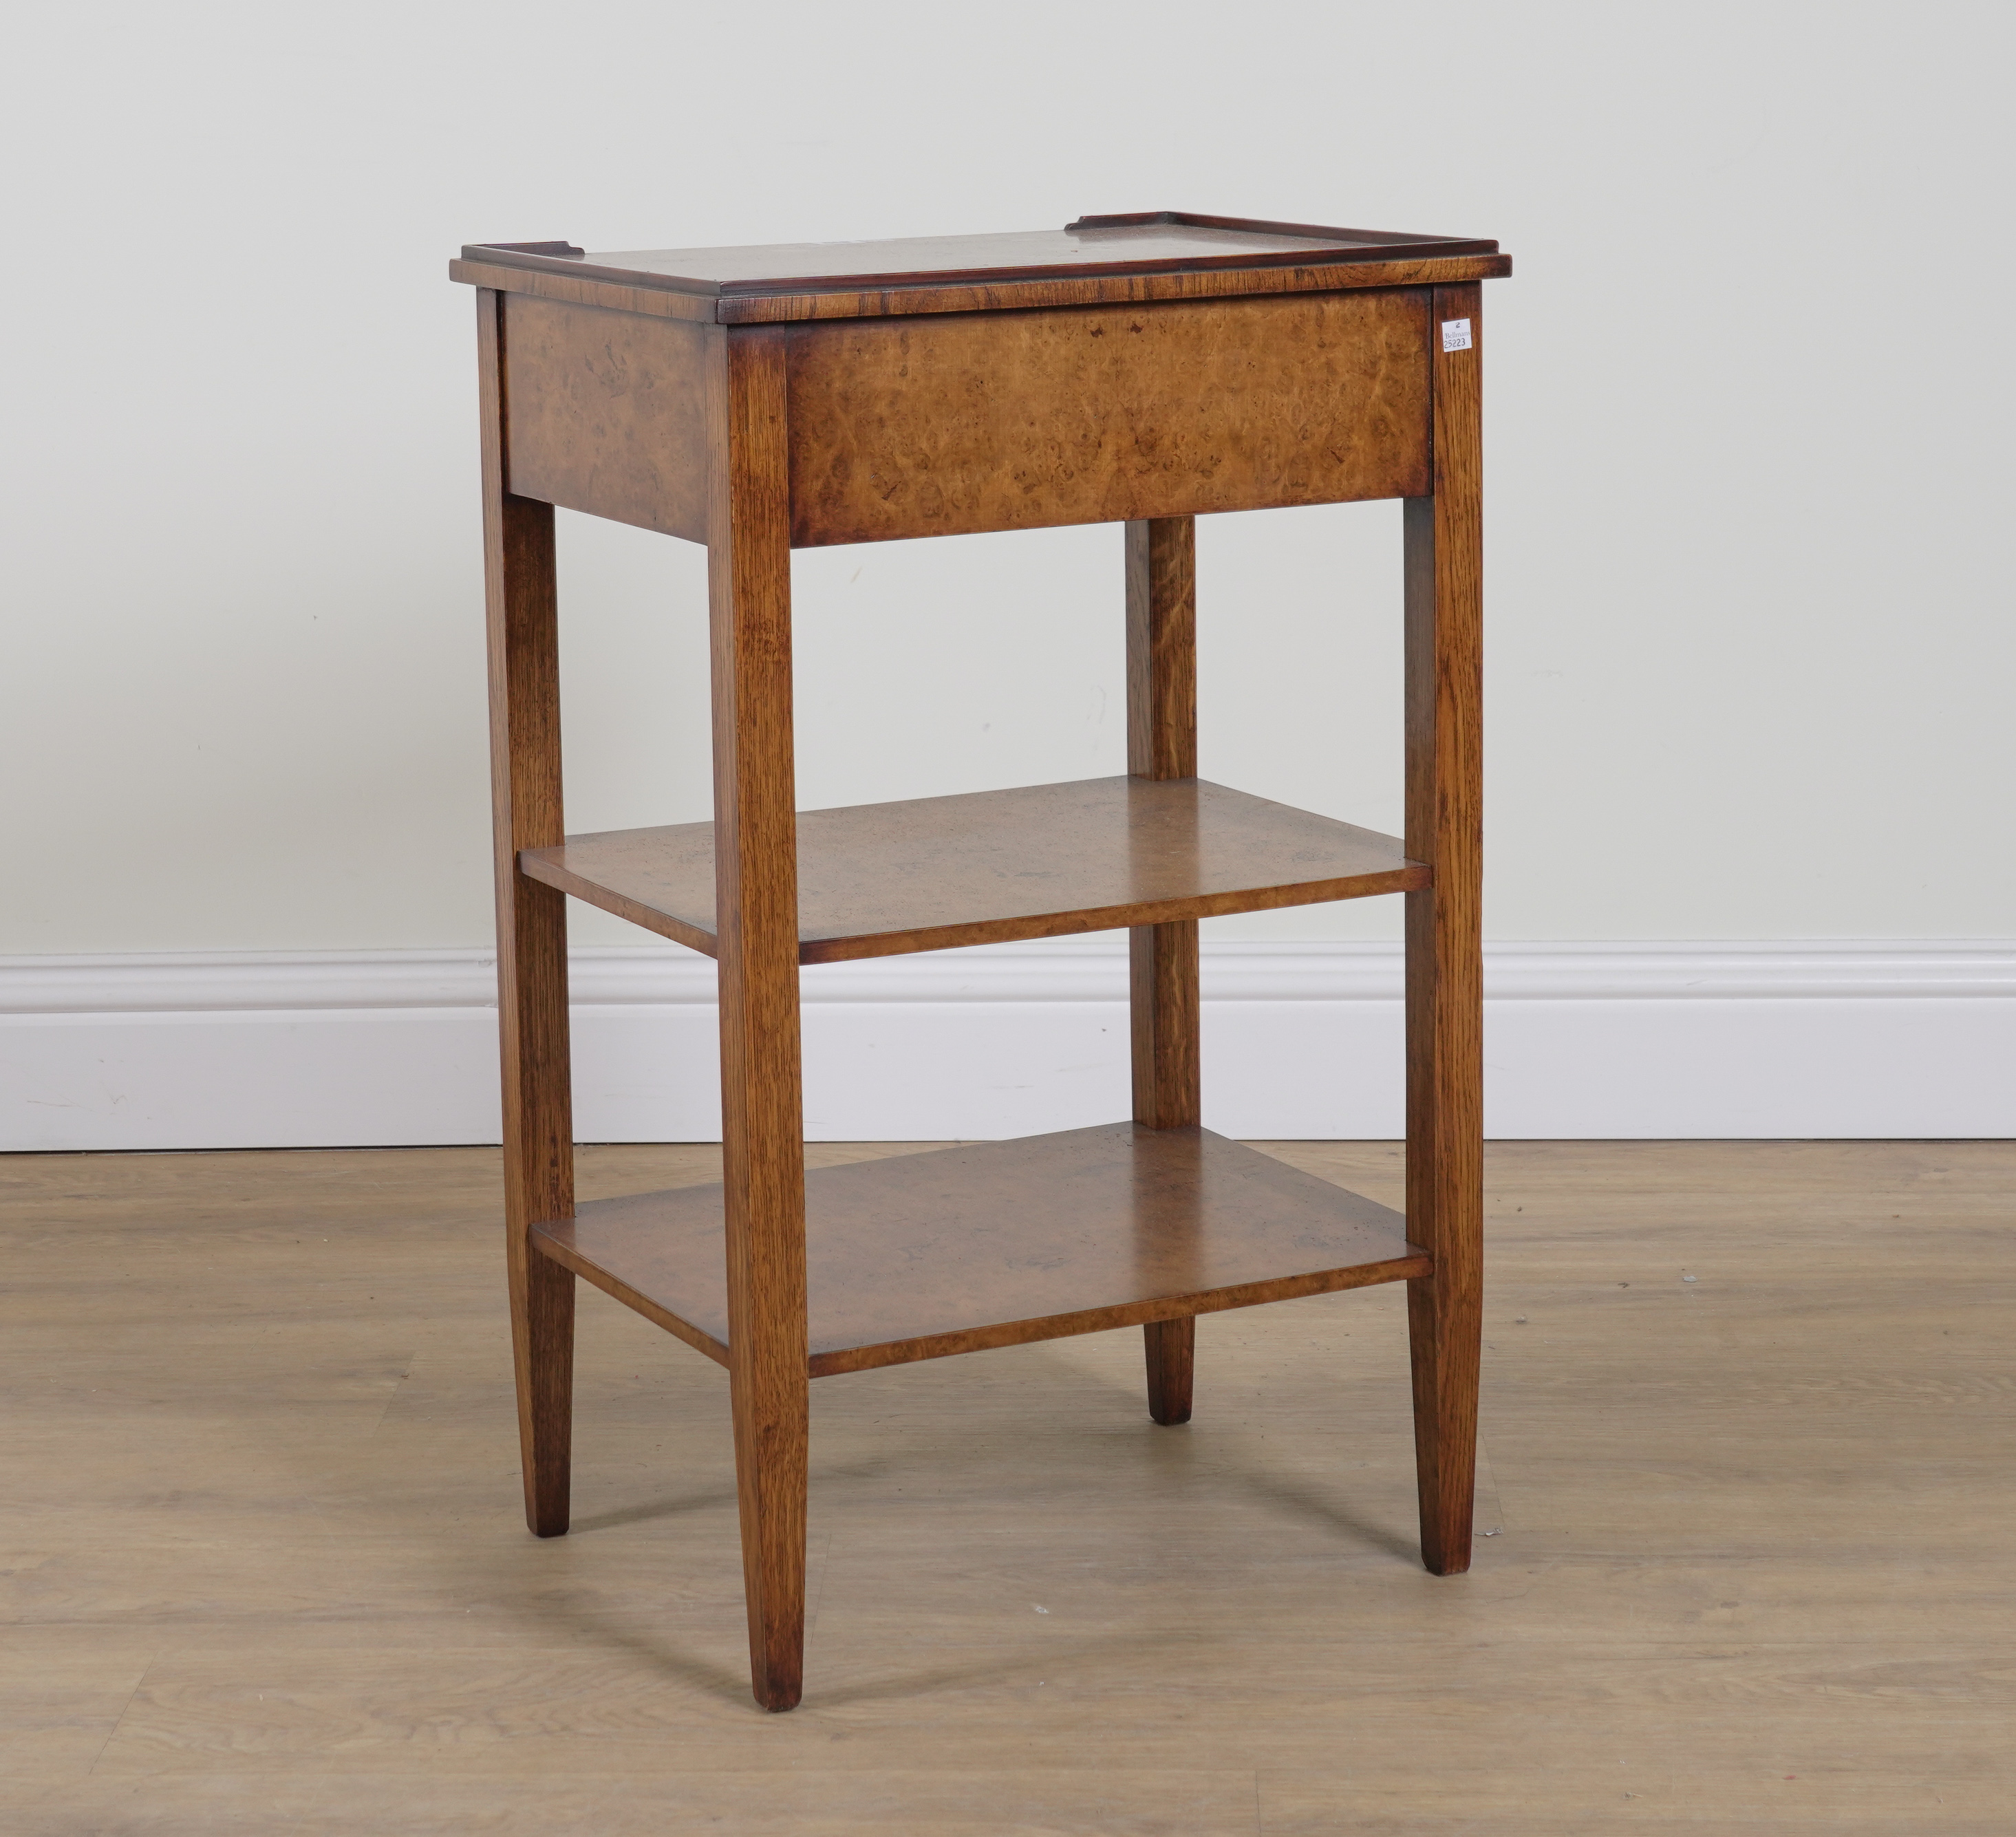 A PAIR OF FIGURED WALNUT SINGLE DRAWER THREE TIER RECTANGULAR SIDE TABLES (2) - Image 4 of 4